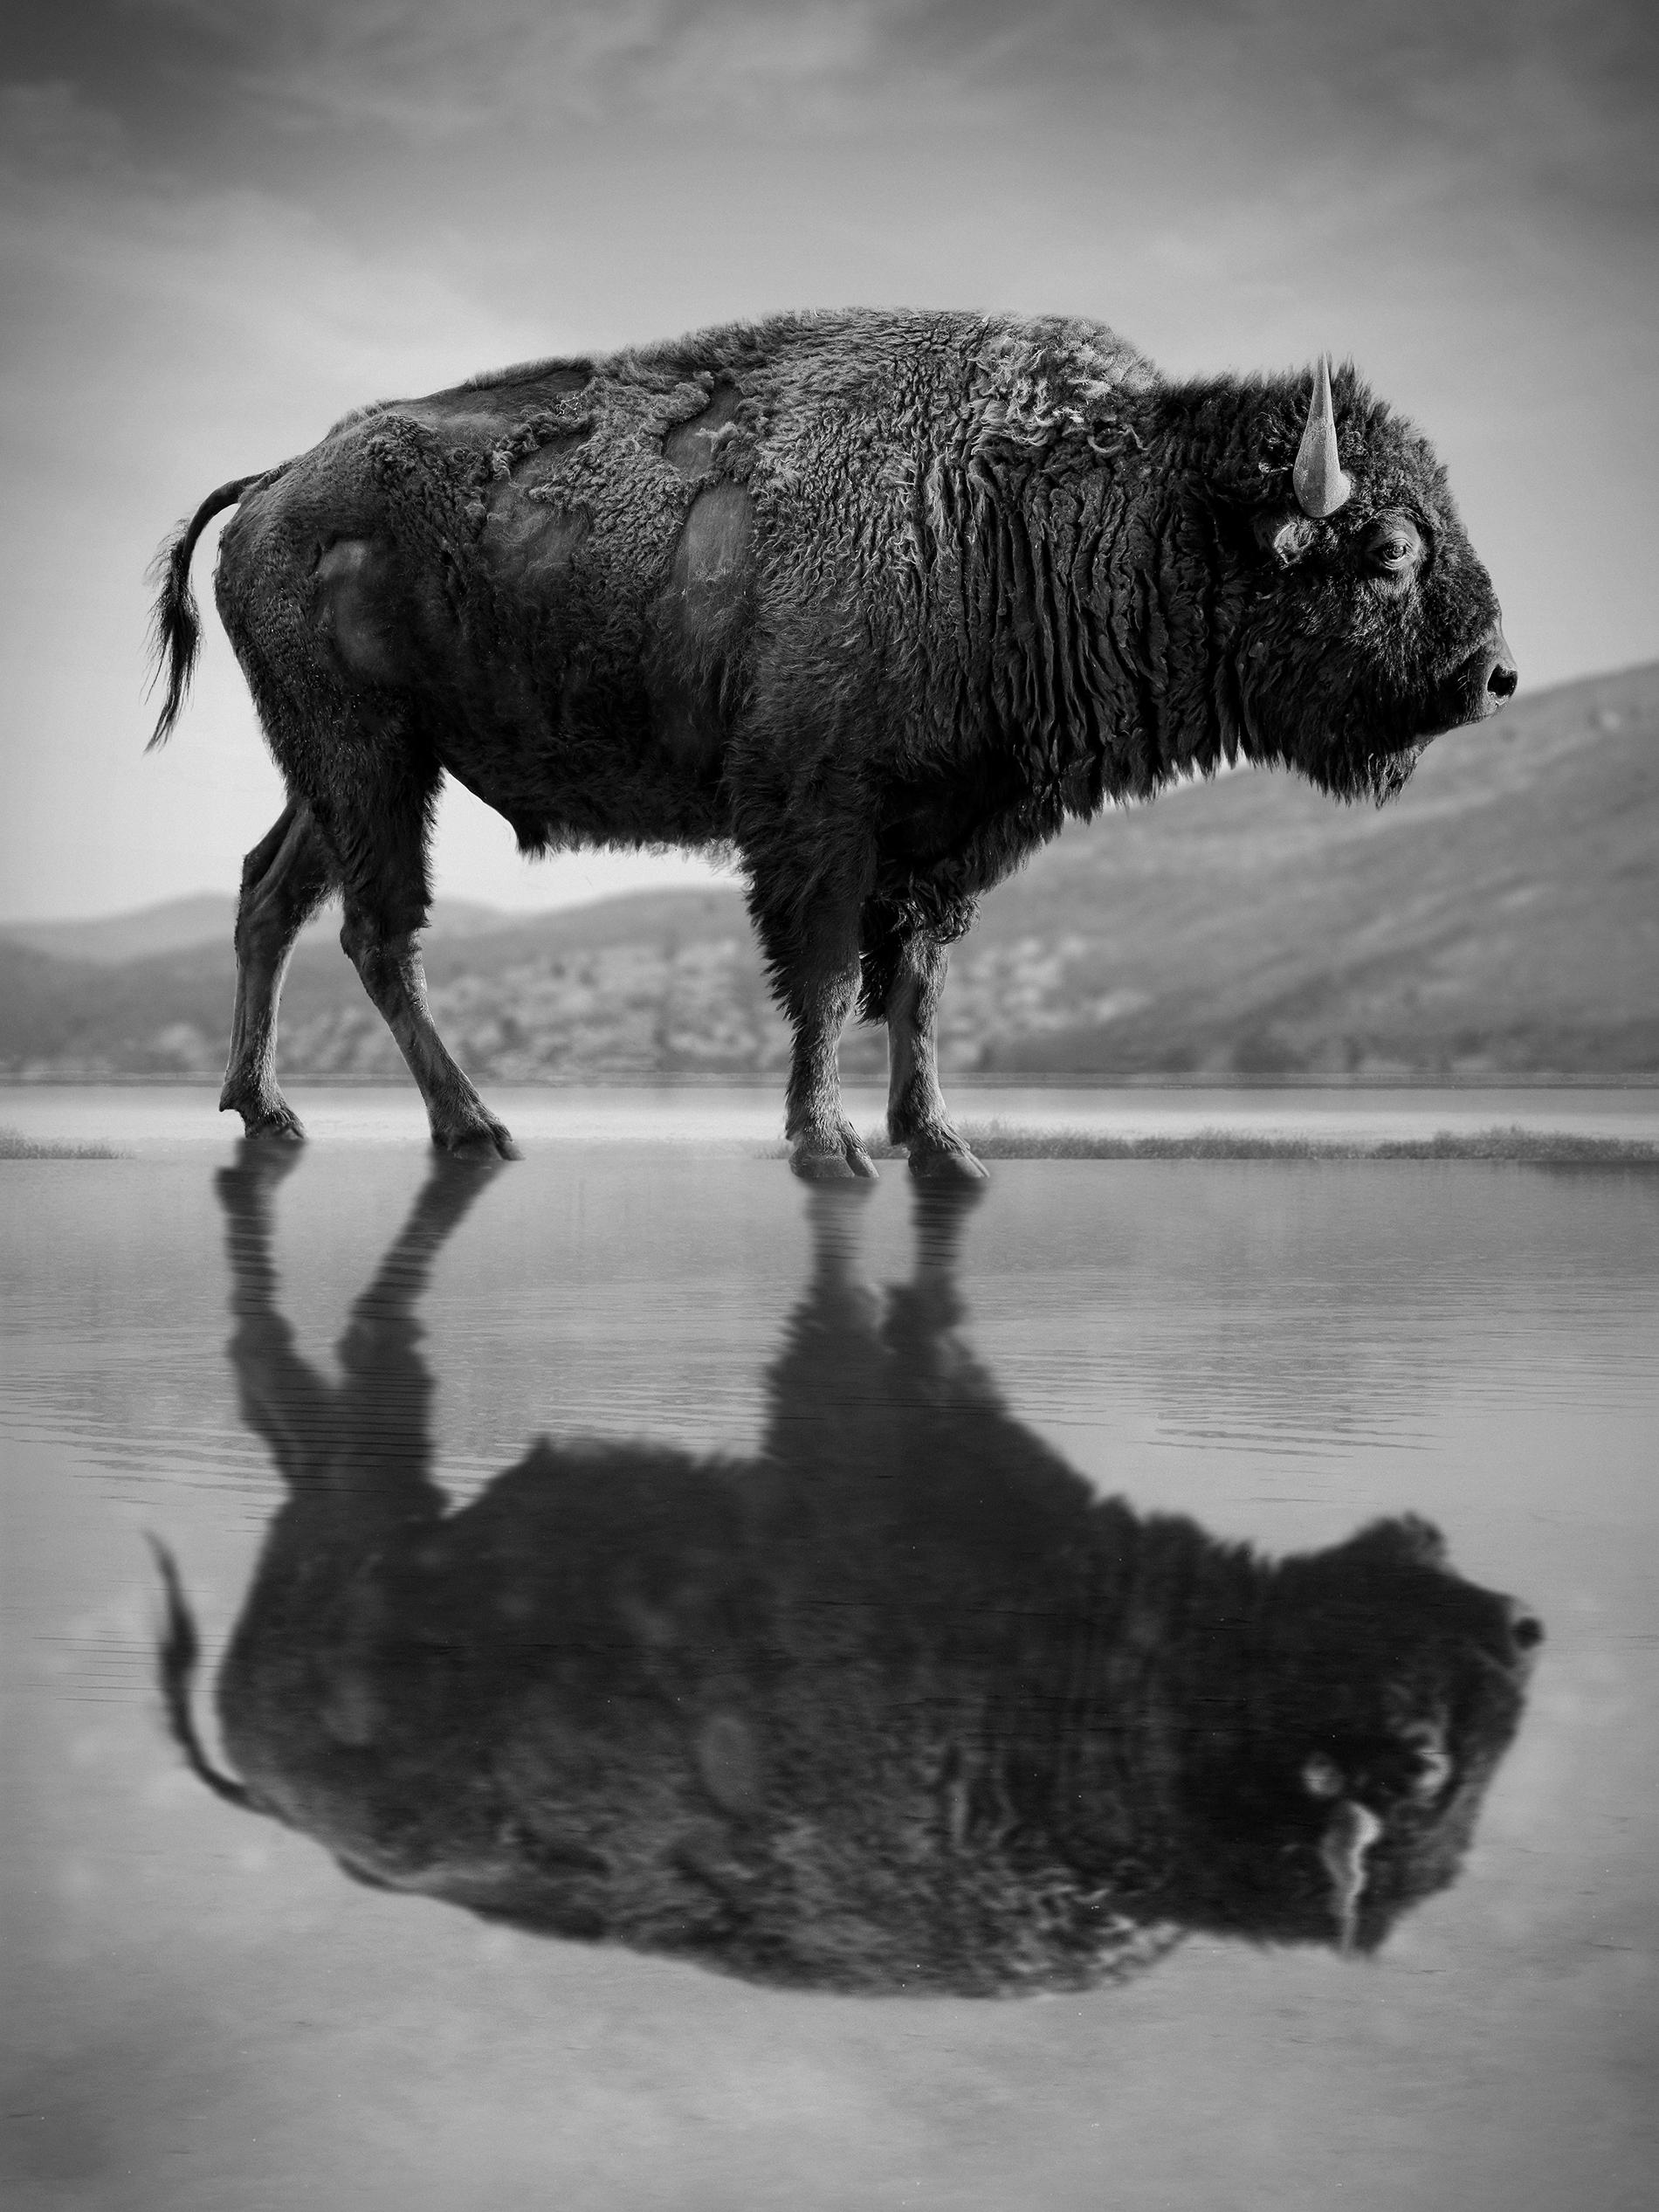 Shane Russeck Black and White Photograph - "Old World" Black & White Bison Photography 48x36 Buffalo Signed Photograph